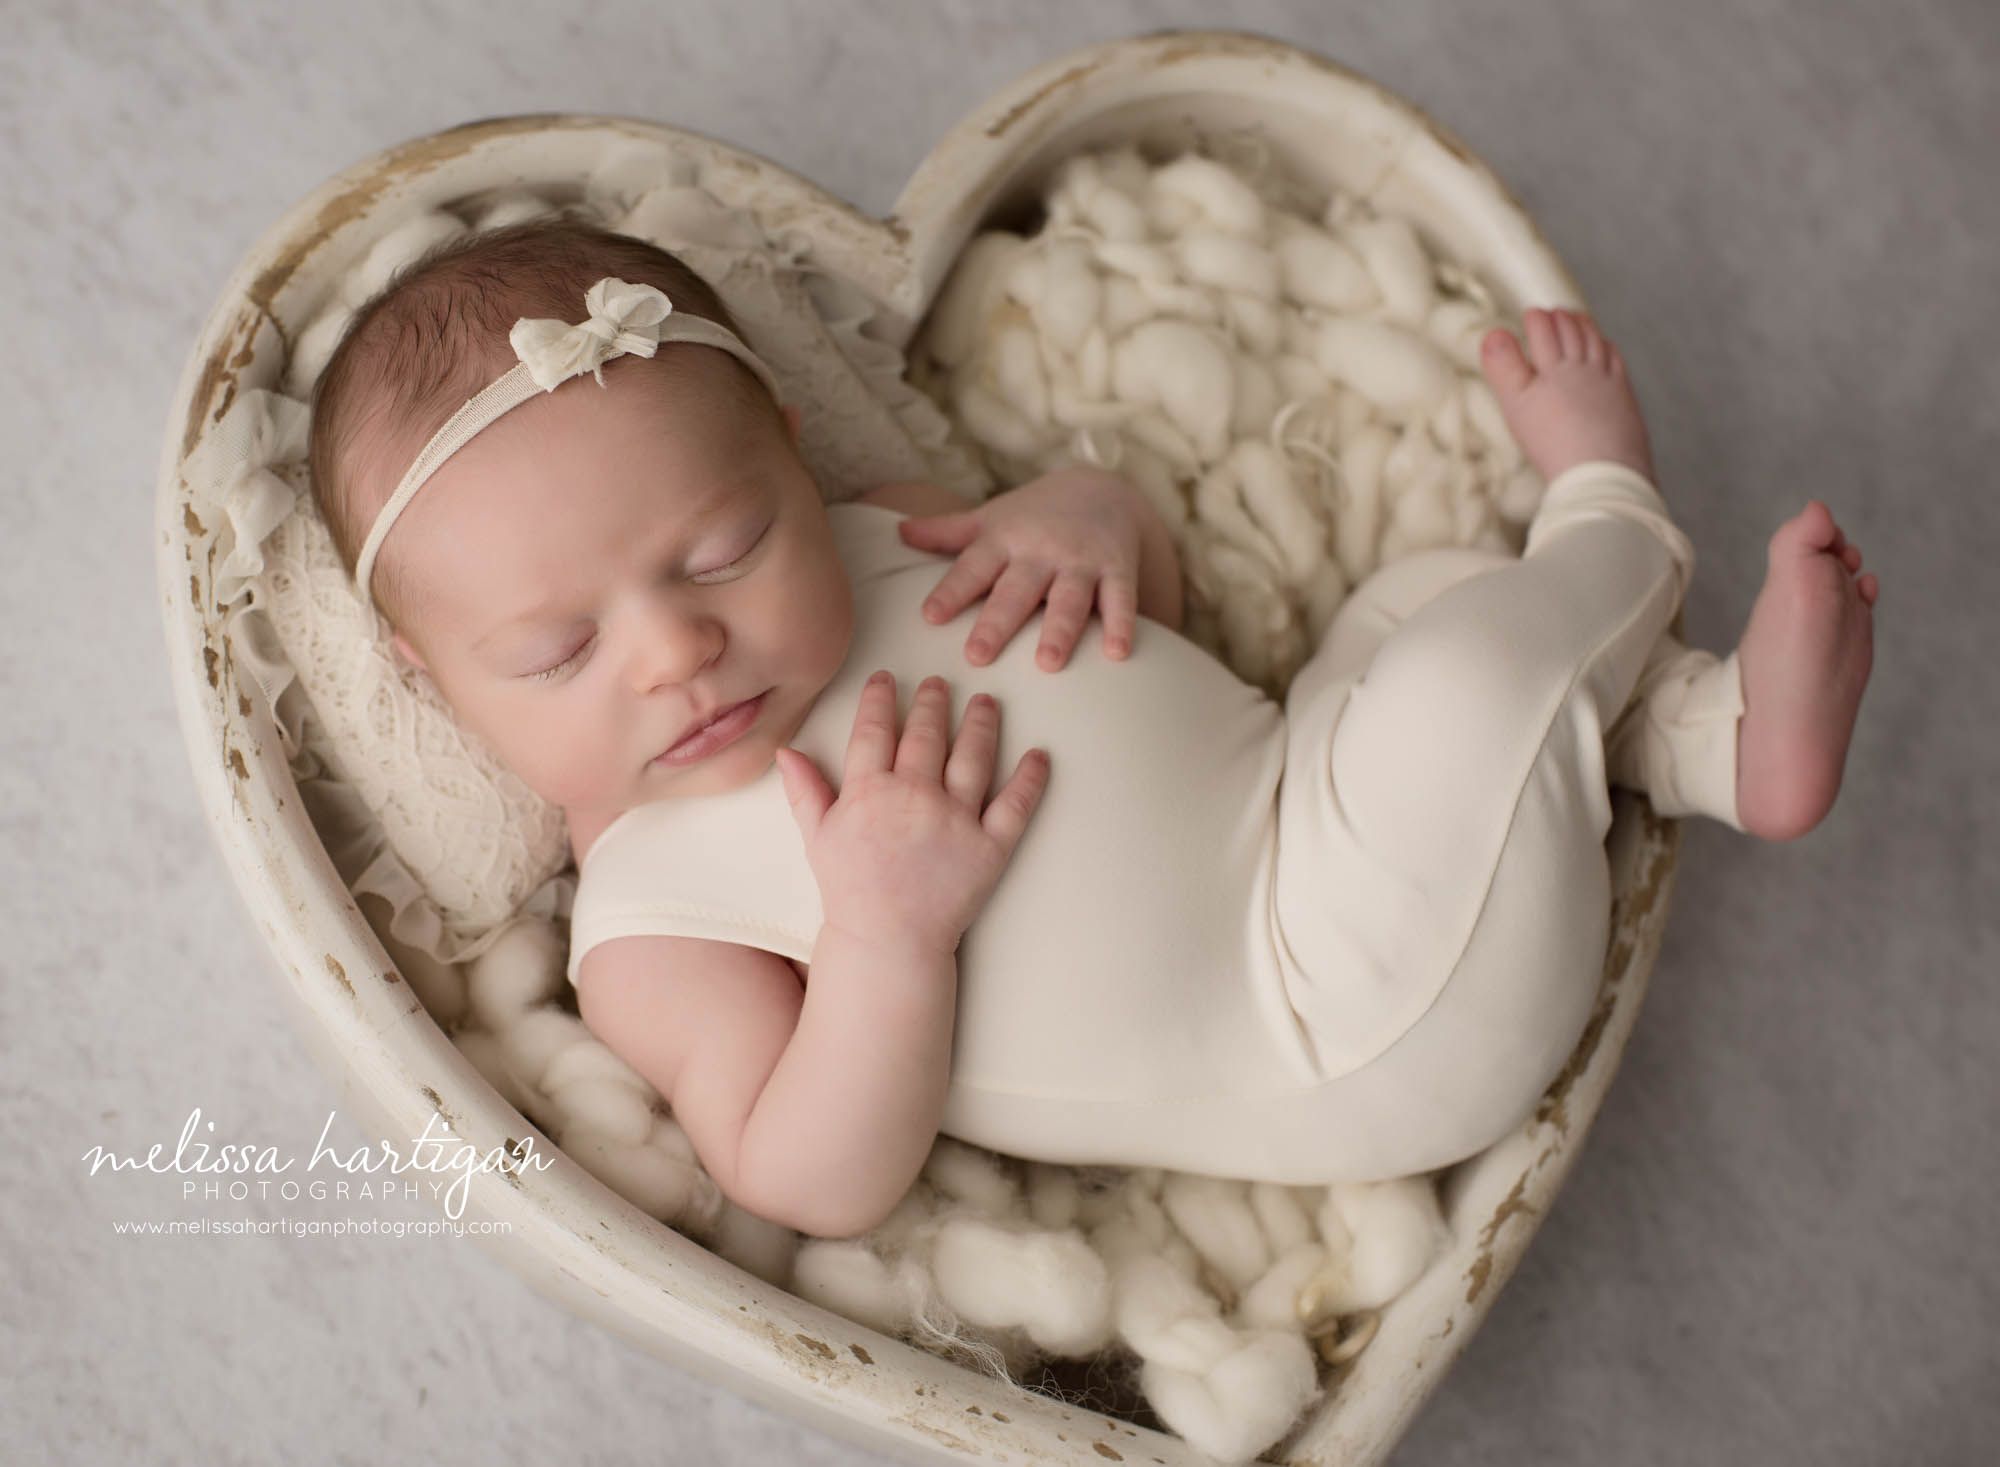 newborn baby girl posed in cream wooden heart bowl prop wearing cream outfit